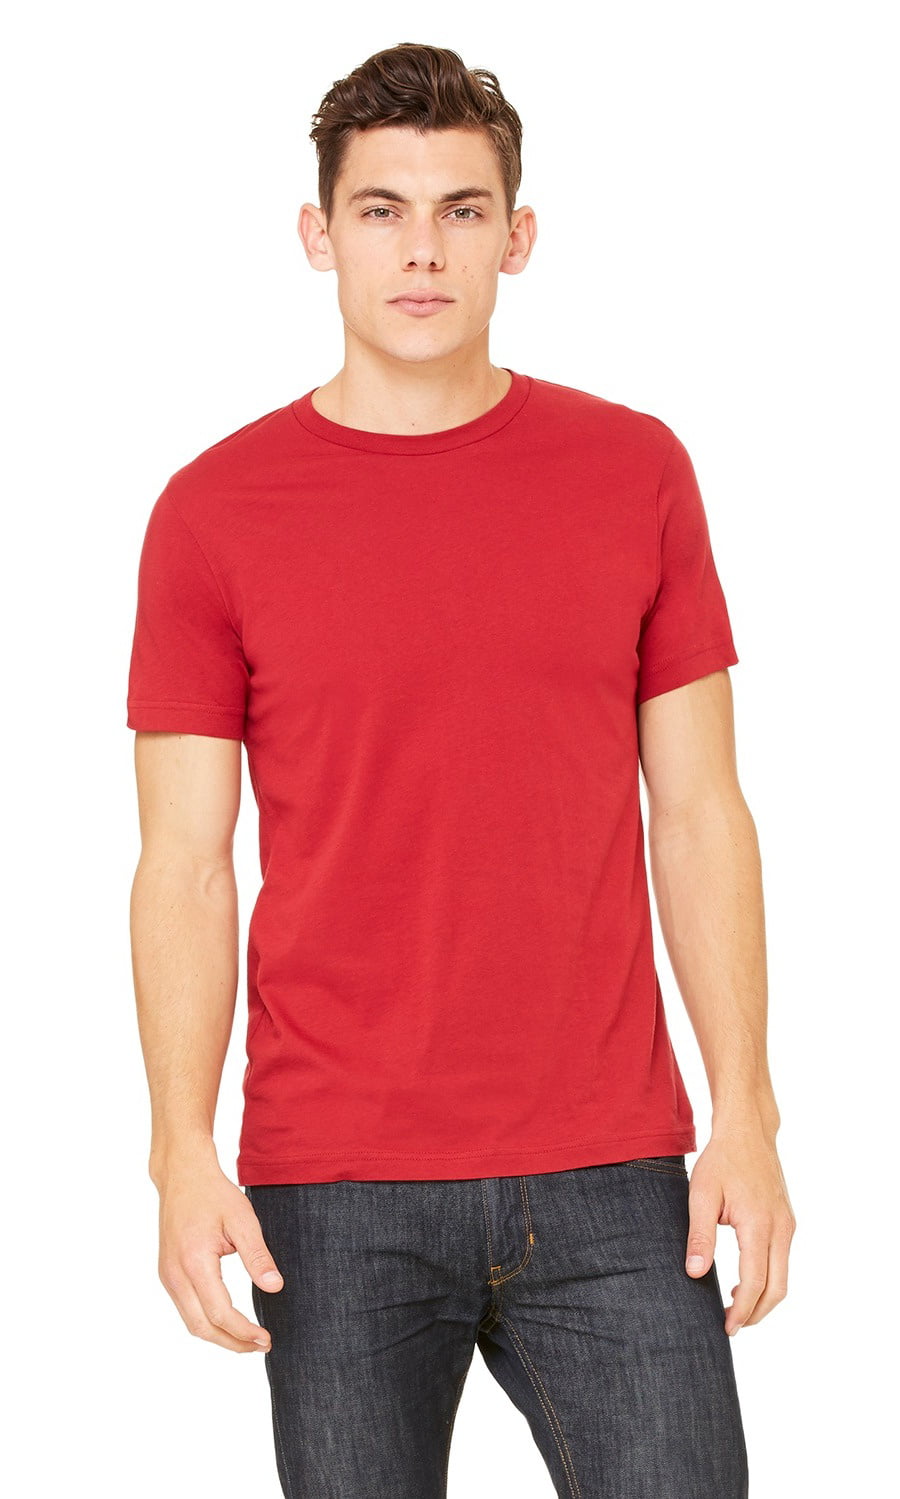 The Bella + Canvas Unisex Jersey Short Sleeve T-Shirt - CANVAS RED - L ...